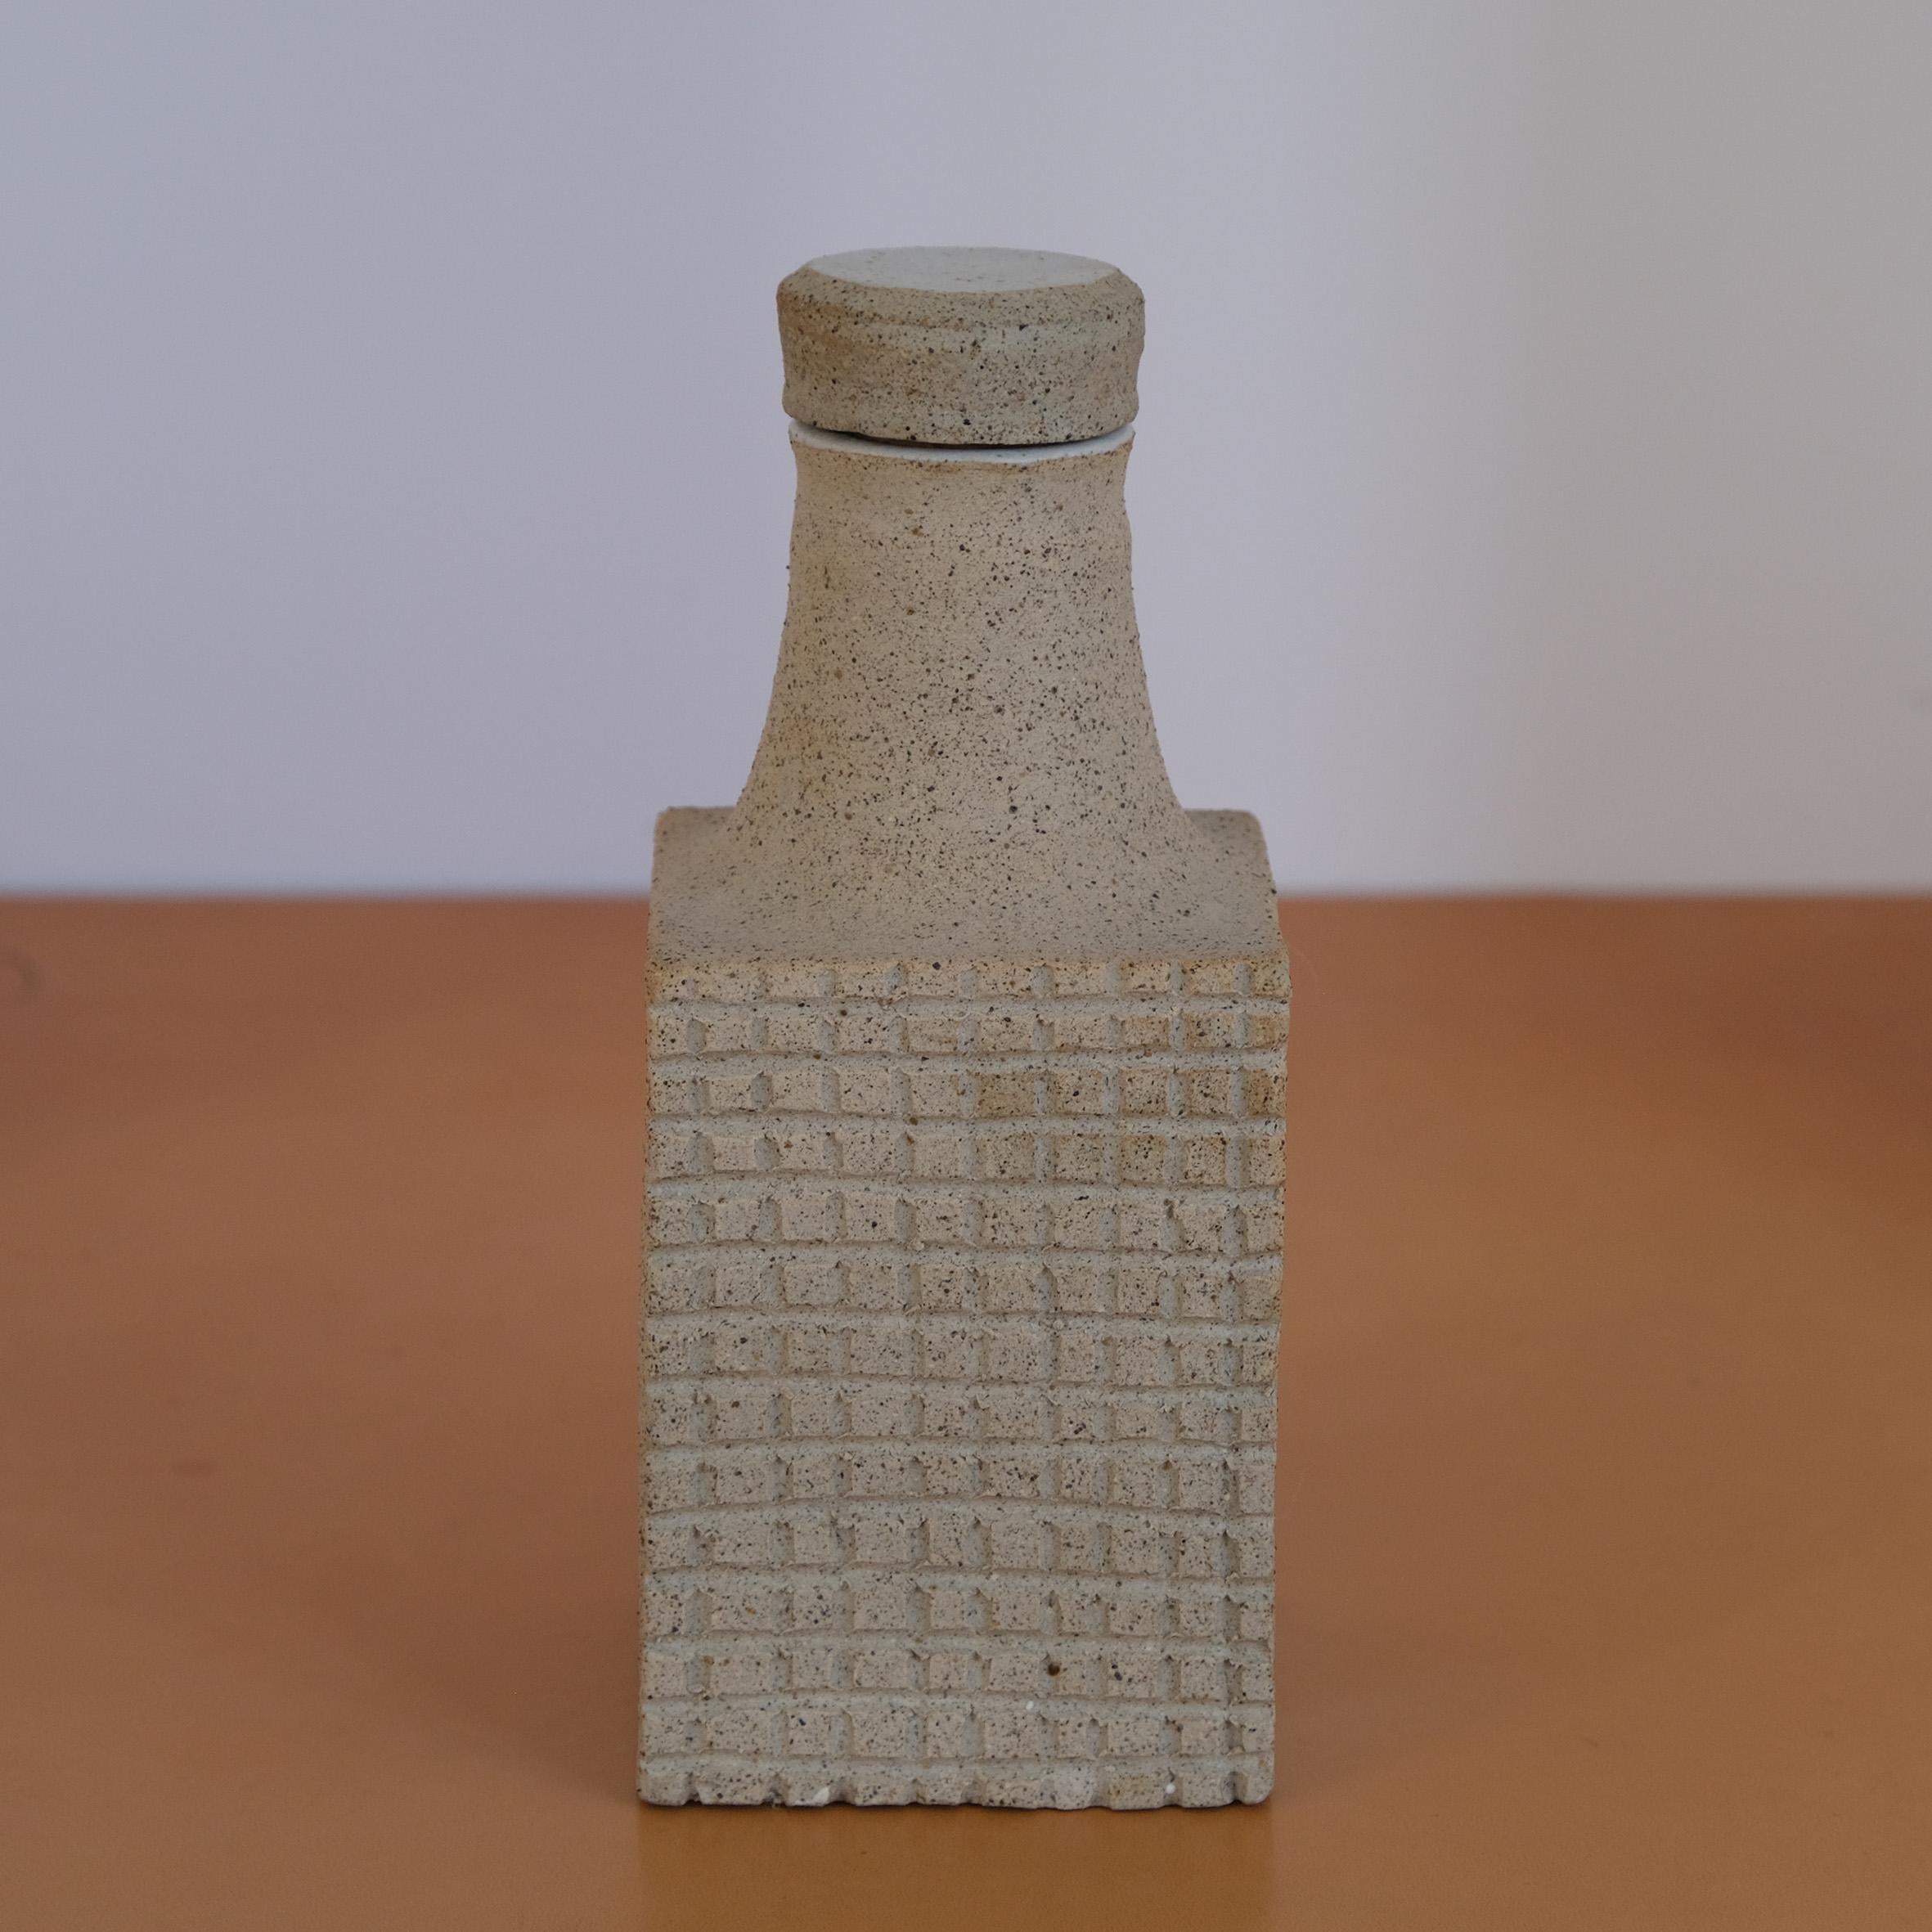 Bruno Gambone (1936-2021)

Bottle

A light grey ceramic bottle, with a rectangular body decorated with a low relief grid on the front and back, the trumpet shape bottle neck closed with a conforming ceramic cap.
Signed underneath « Gambone,